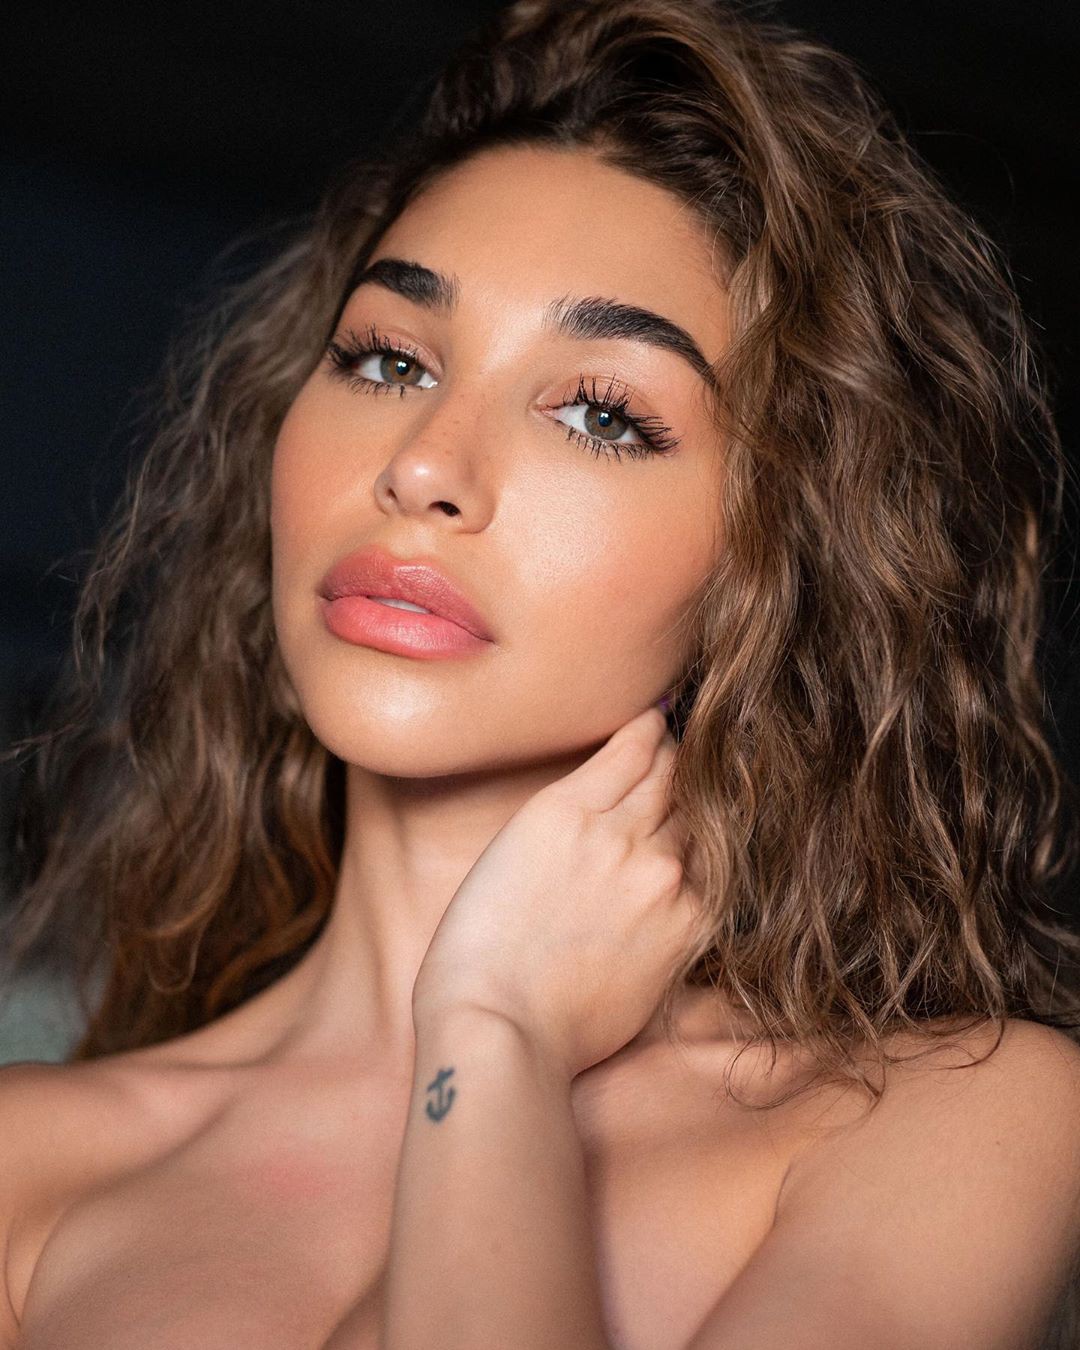 Beautiful Outfits Chantel Jeffries Images Instagram: most liked Instagram photo,  hottest girls on Instagram,  Hot Instagram Models,  top Instagram models,  Chantel Jeffries  